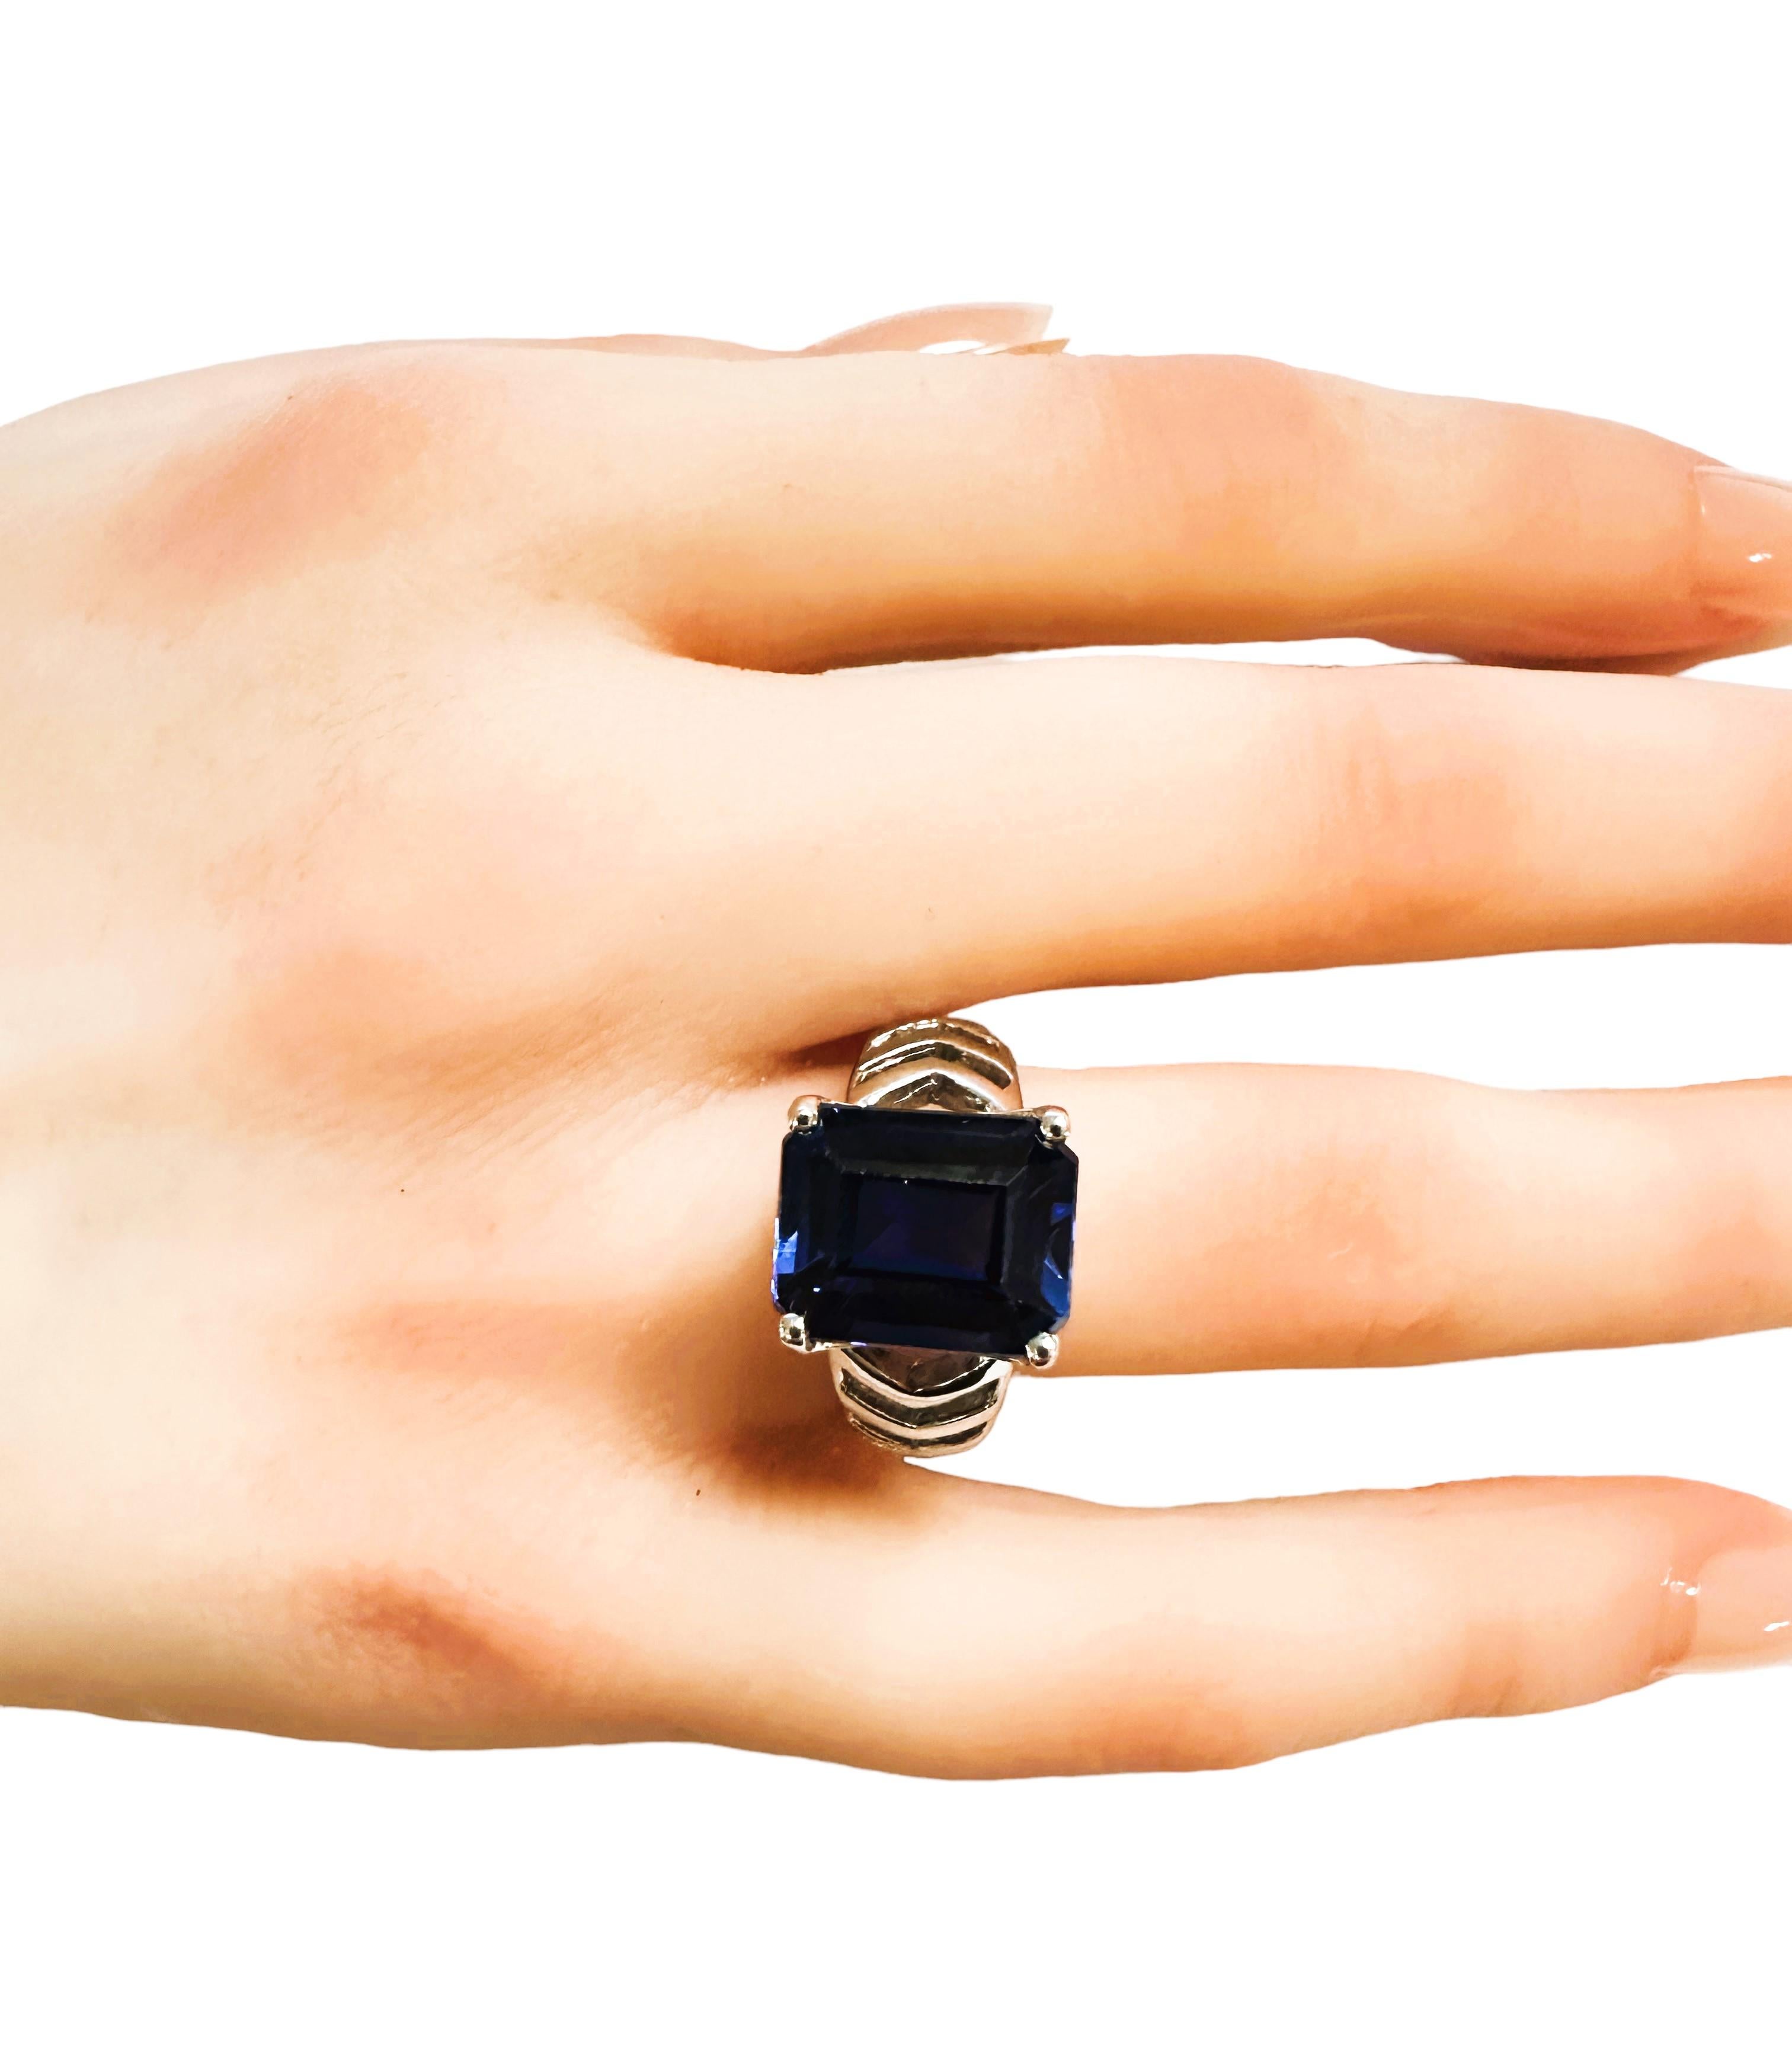 New Handmade African 8.30 Ct Royal Blue Sapphire Sterling Ring Size 7.25 For Sale 2